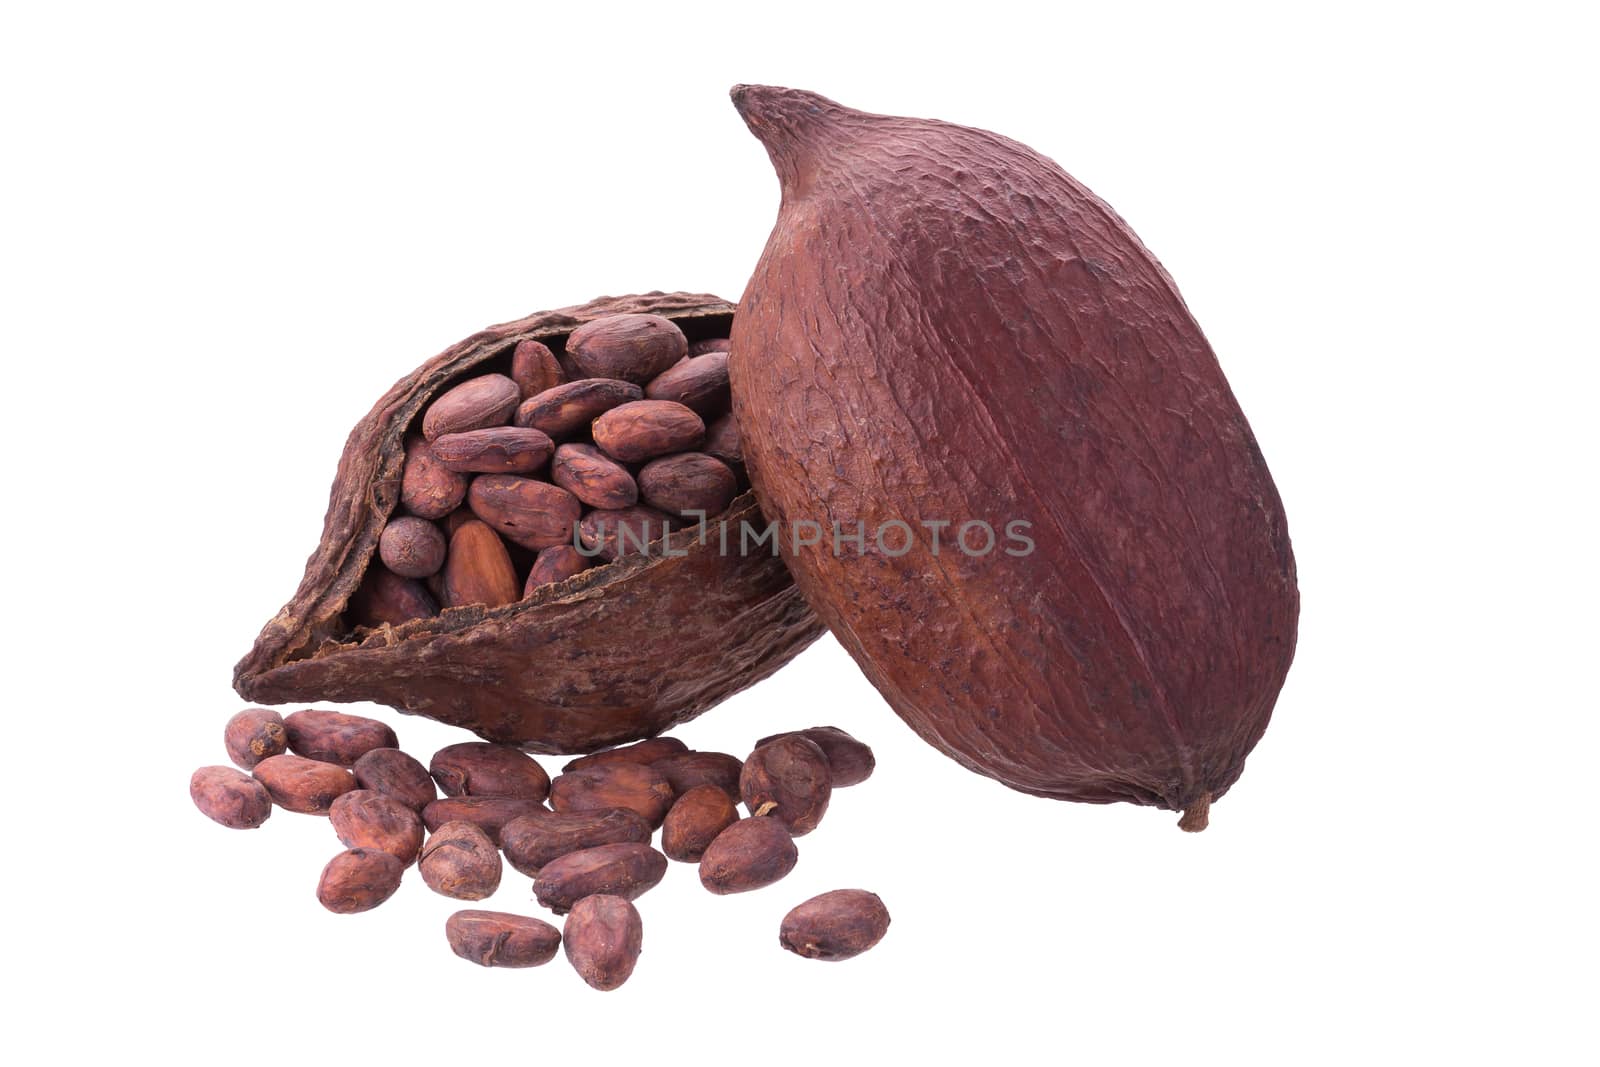 Cacao pods and beans isolated on white background.